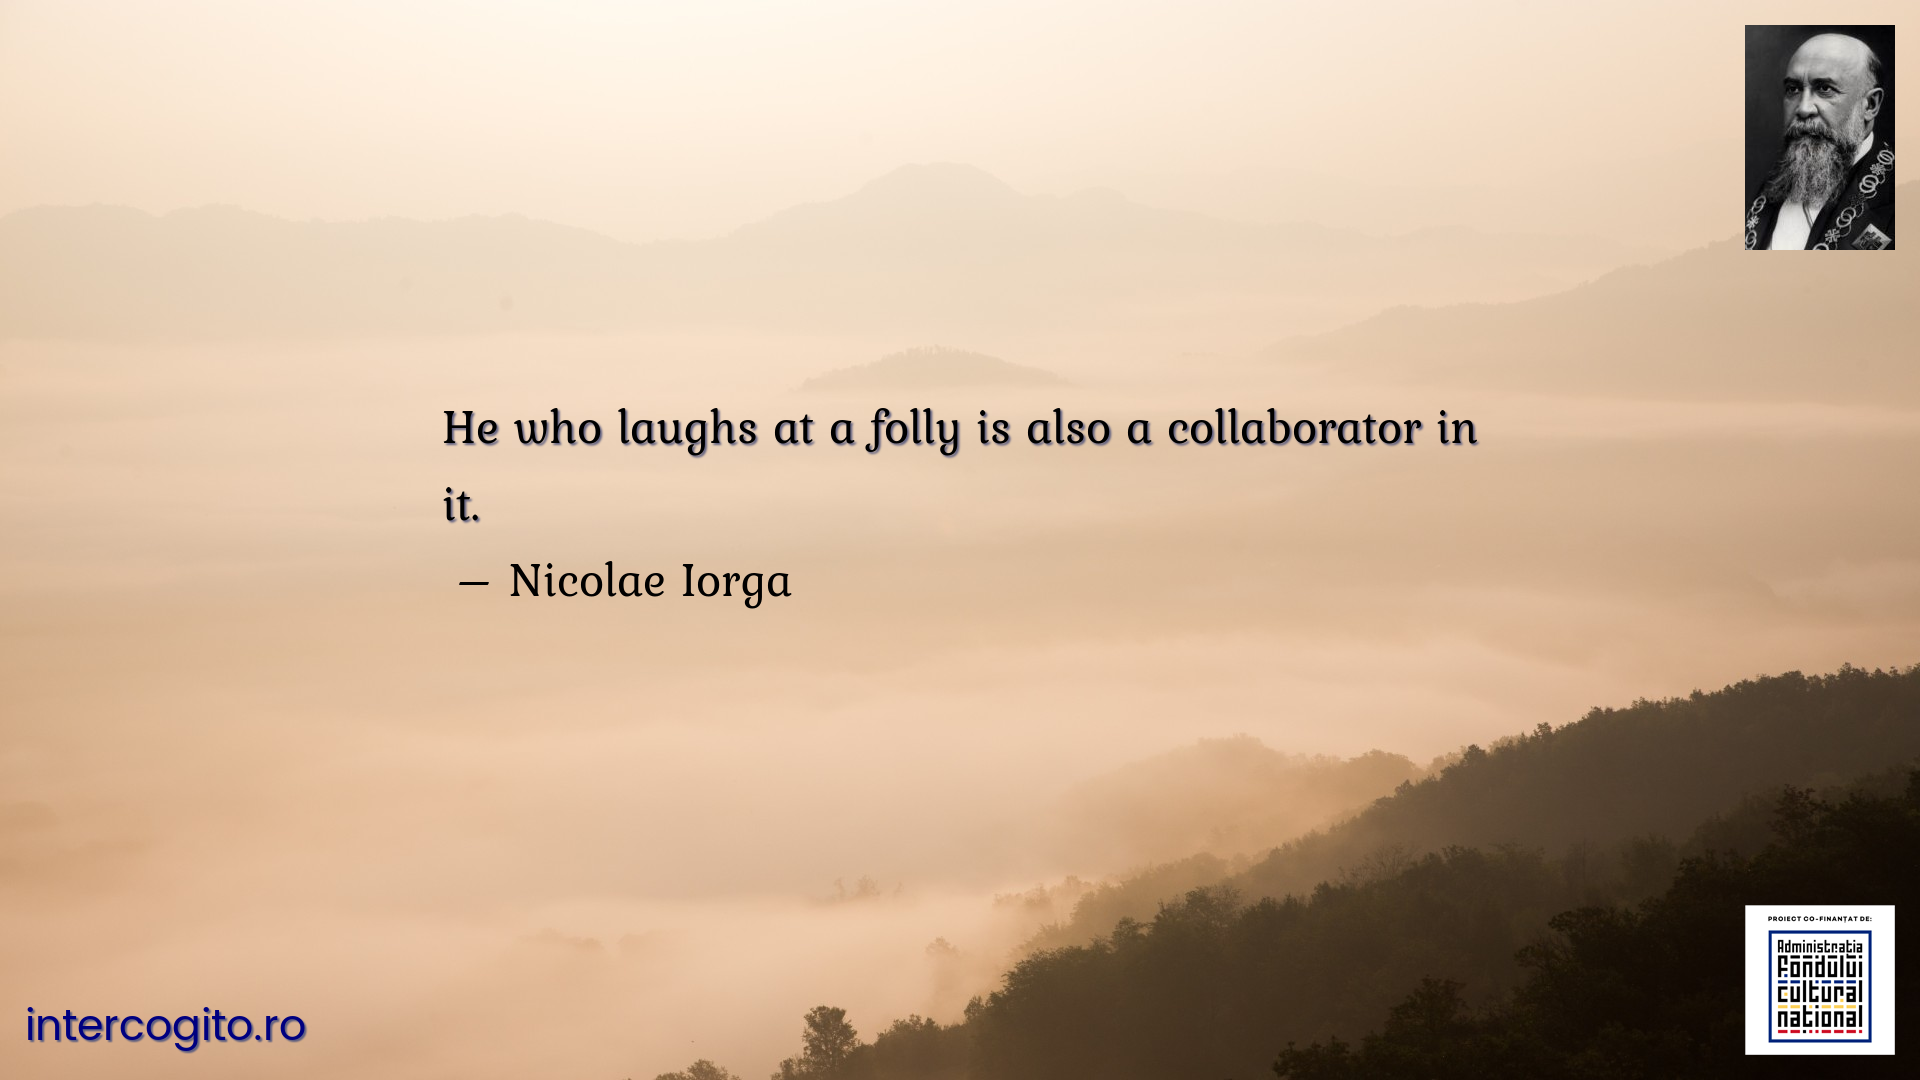 He who laughs at a folly is also a collaborator in it.